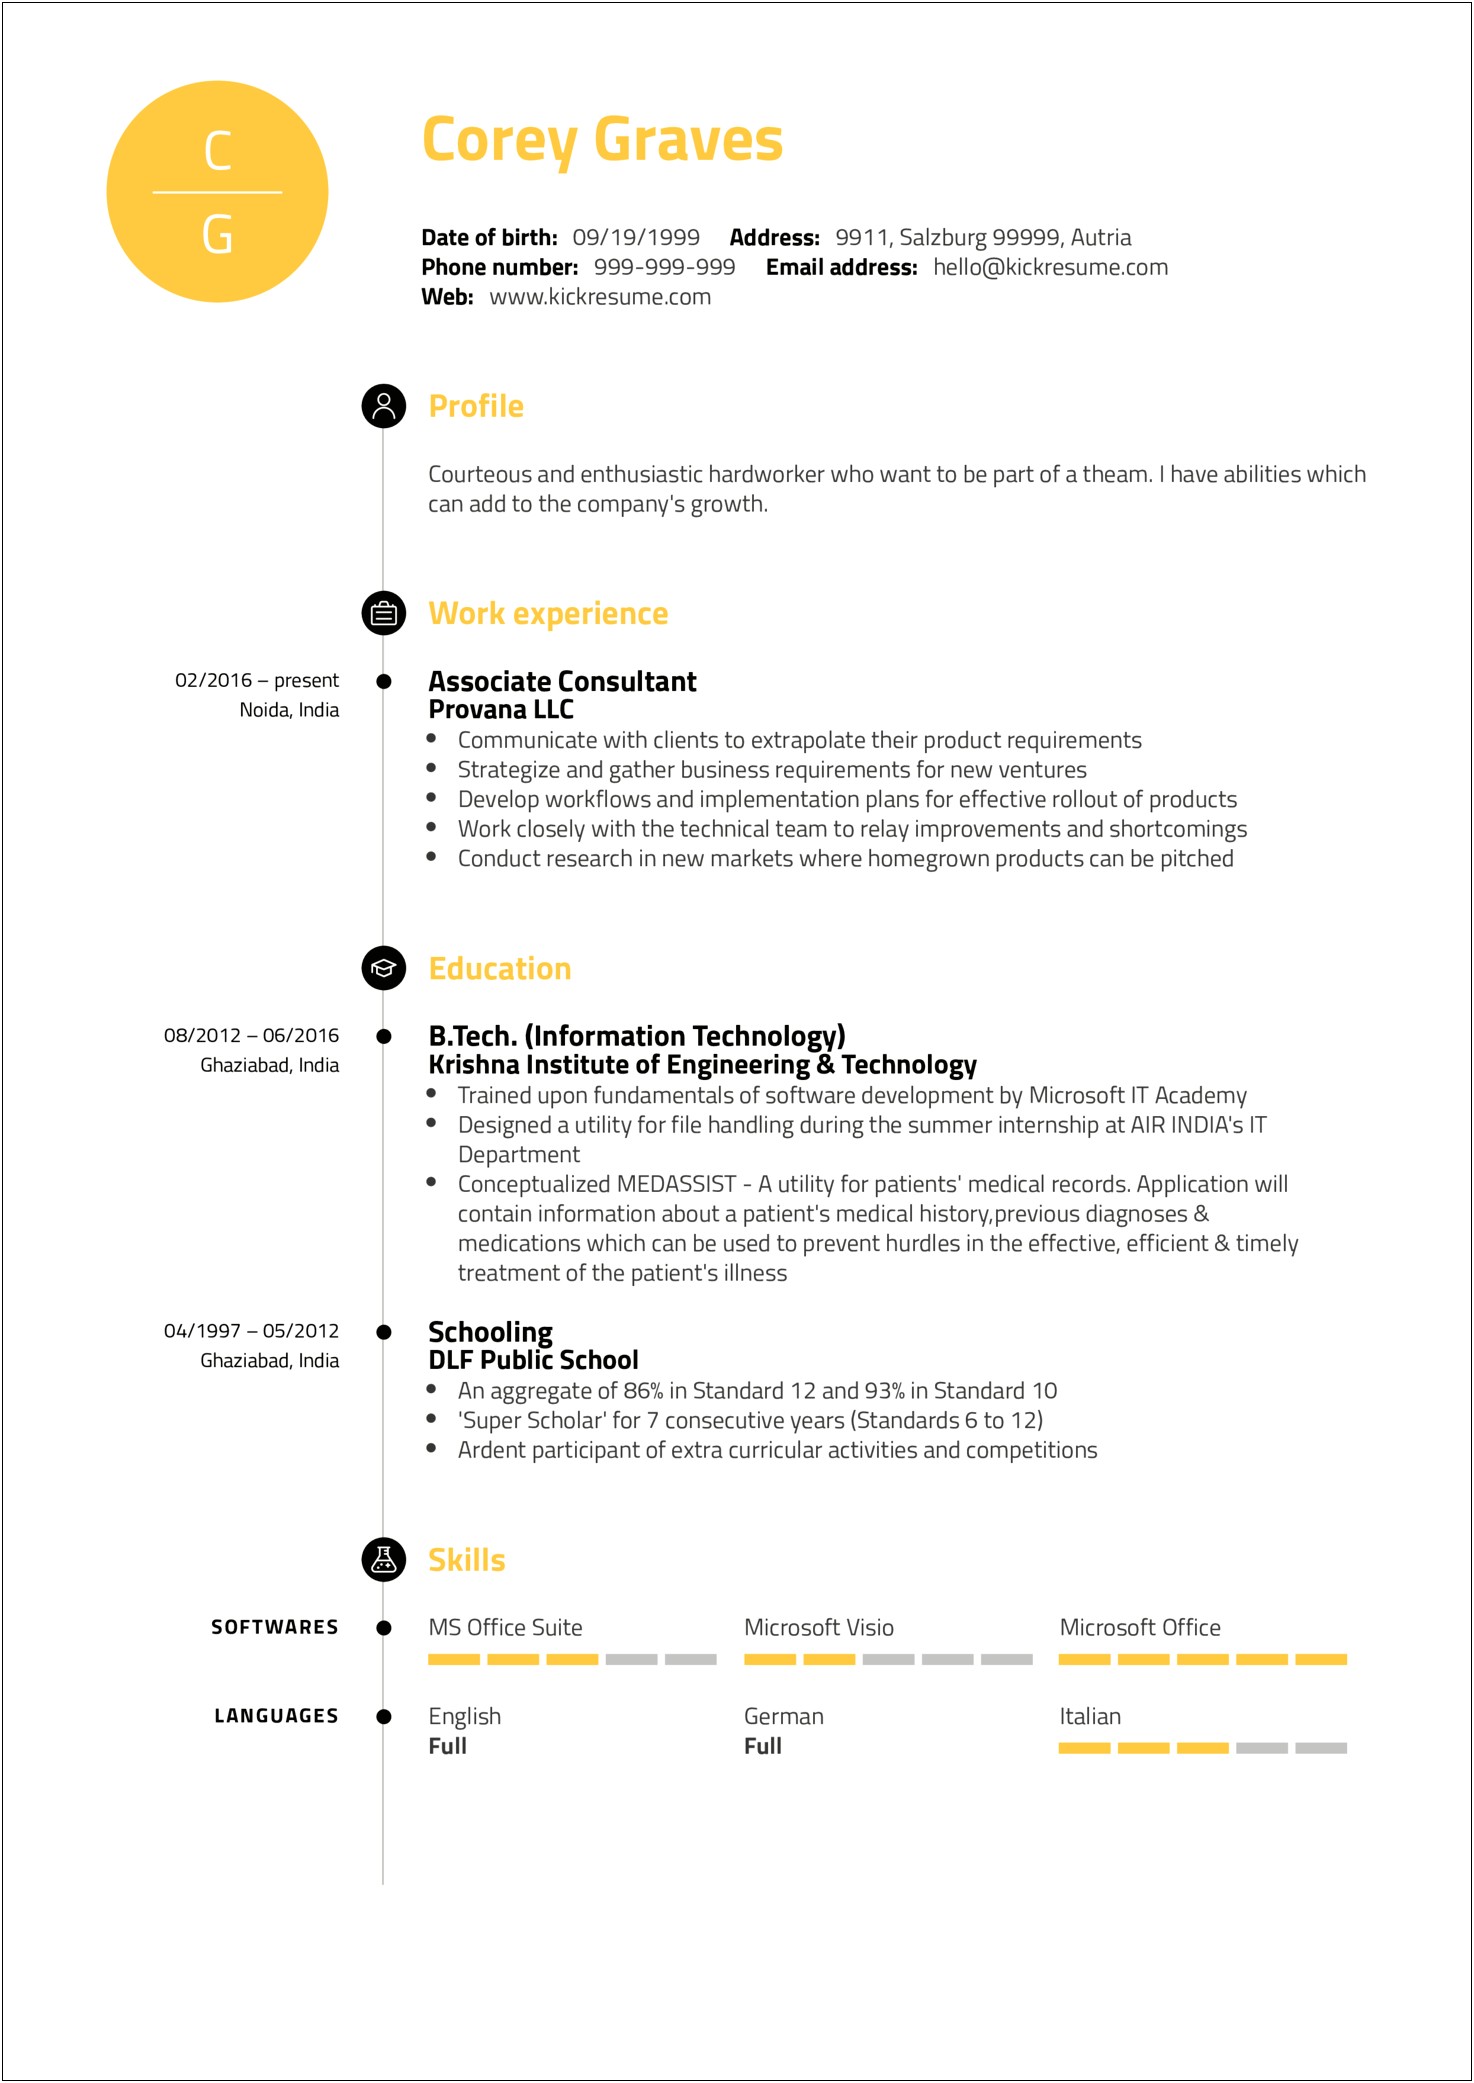 One Year Experience Resume For Business Analyst In